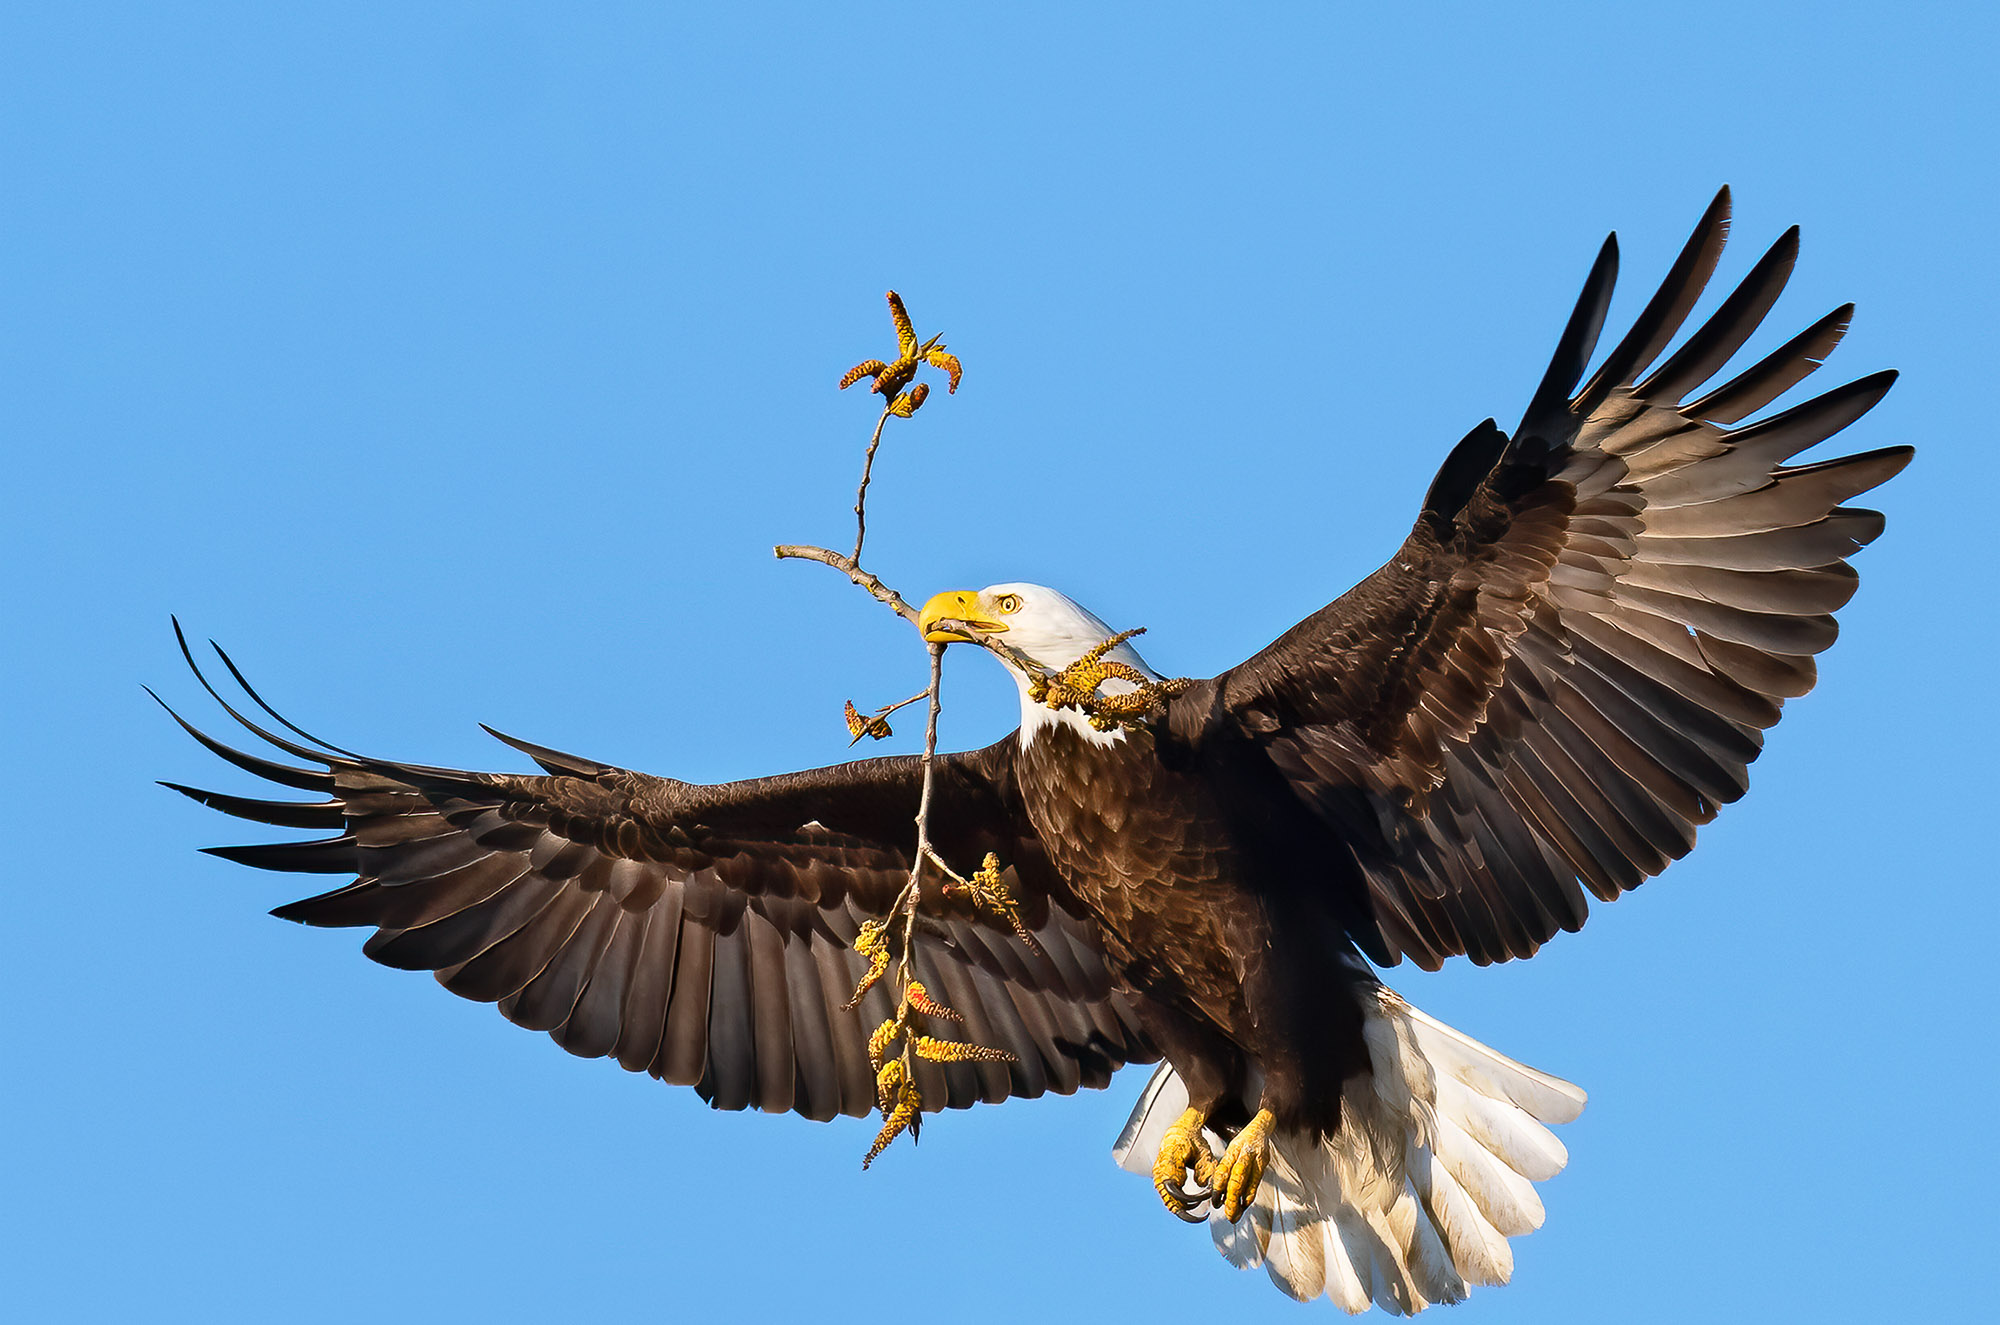 Bald Eagle with a branch for the nest